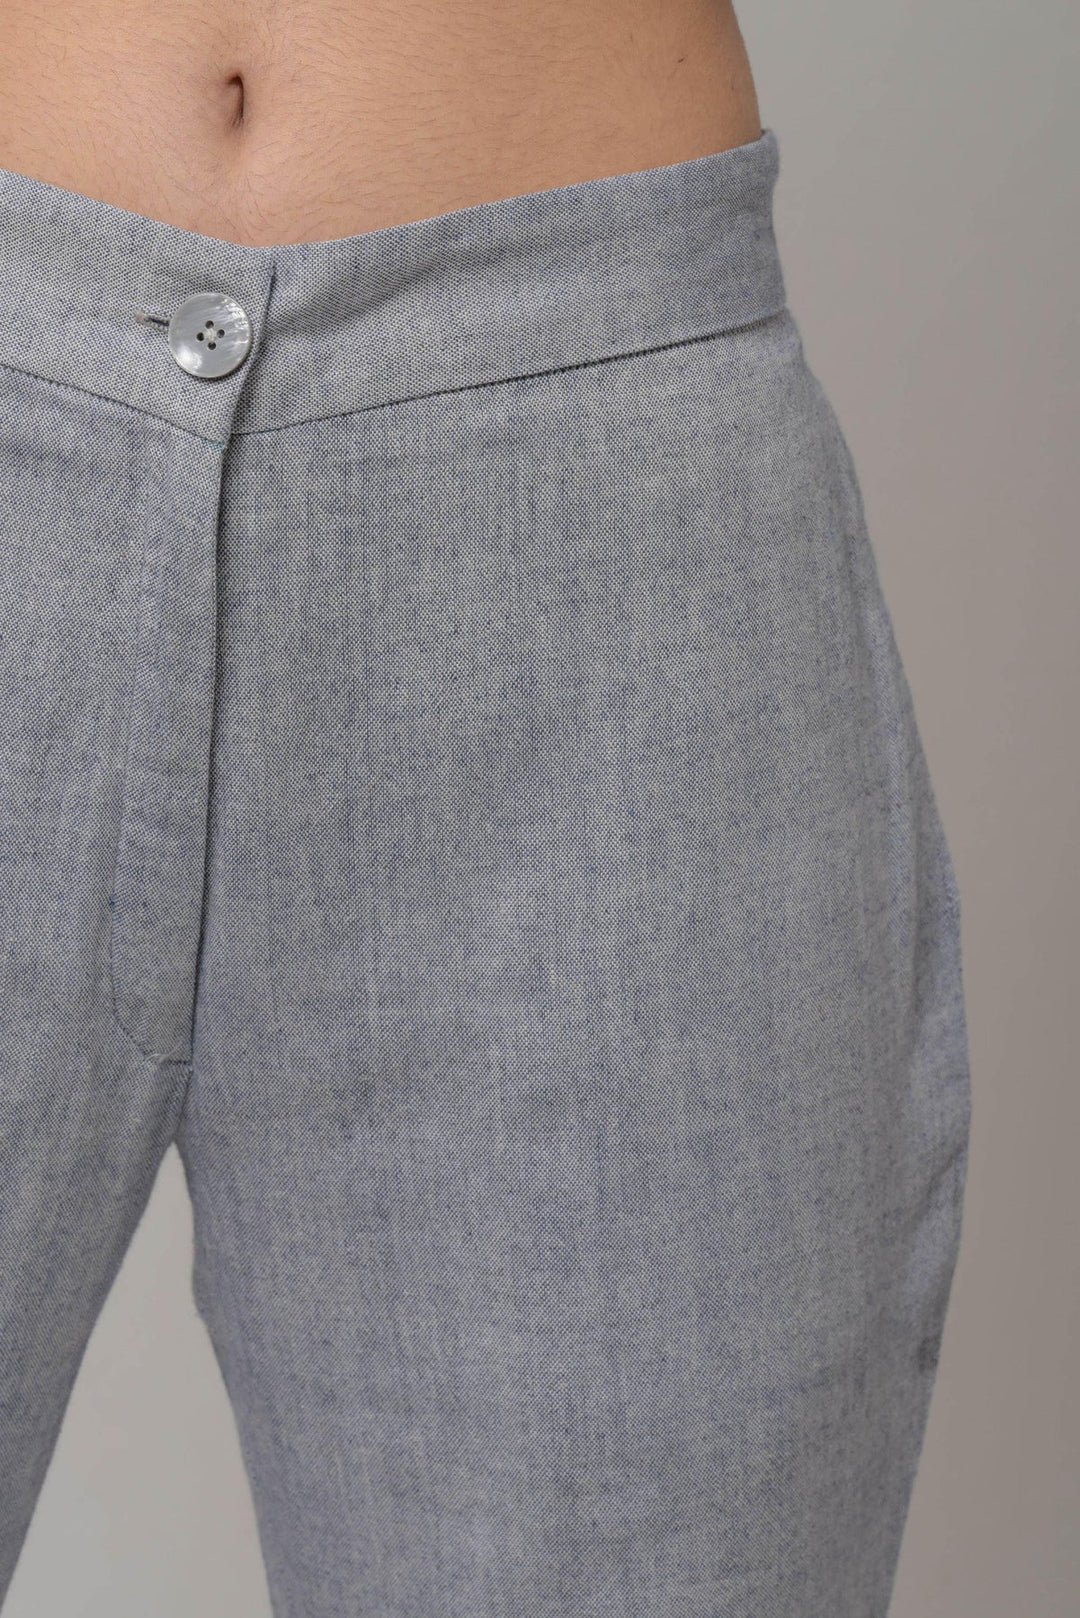 Handwoven Cotton Trousers: Regular Fit, Ankle Length, Care Instructions Included | Mika Handwoven Trousers - Gray